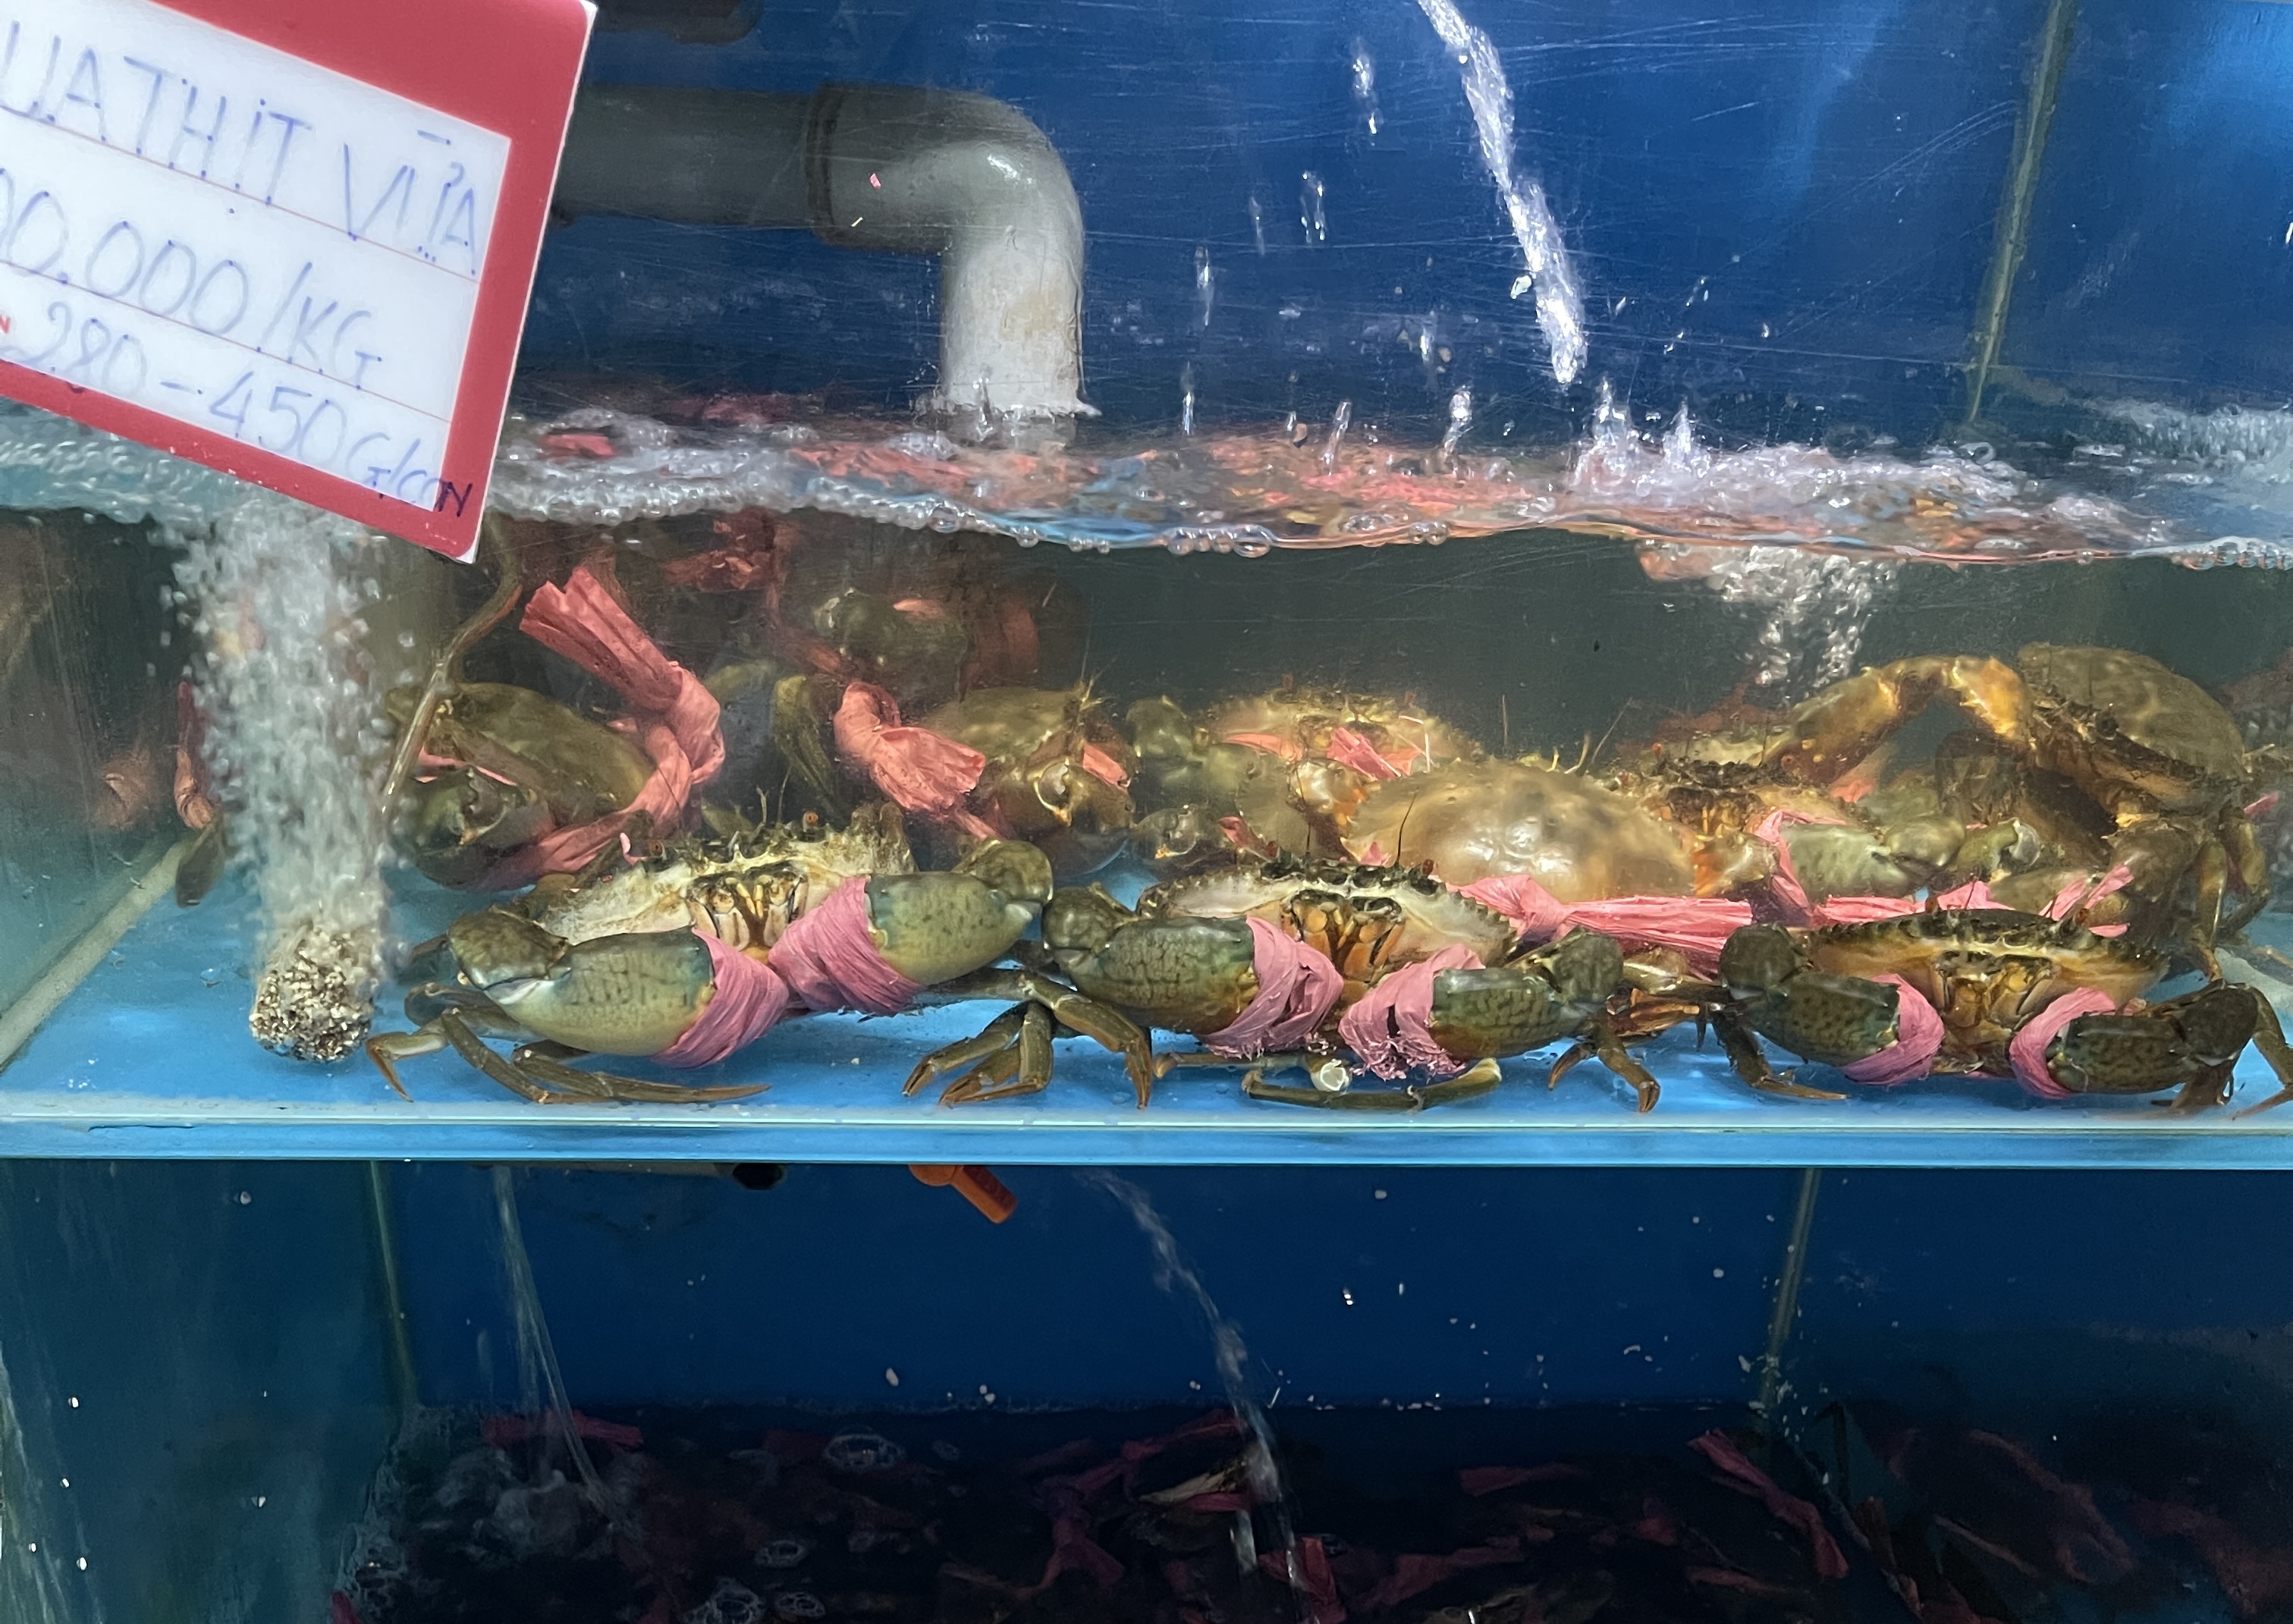 Live crabs are kept in tanks before serving at a restaurant in Binh Thanh District, Ho Chi Minh City. Photo: Dong Nguyen / Tuoi Tre News